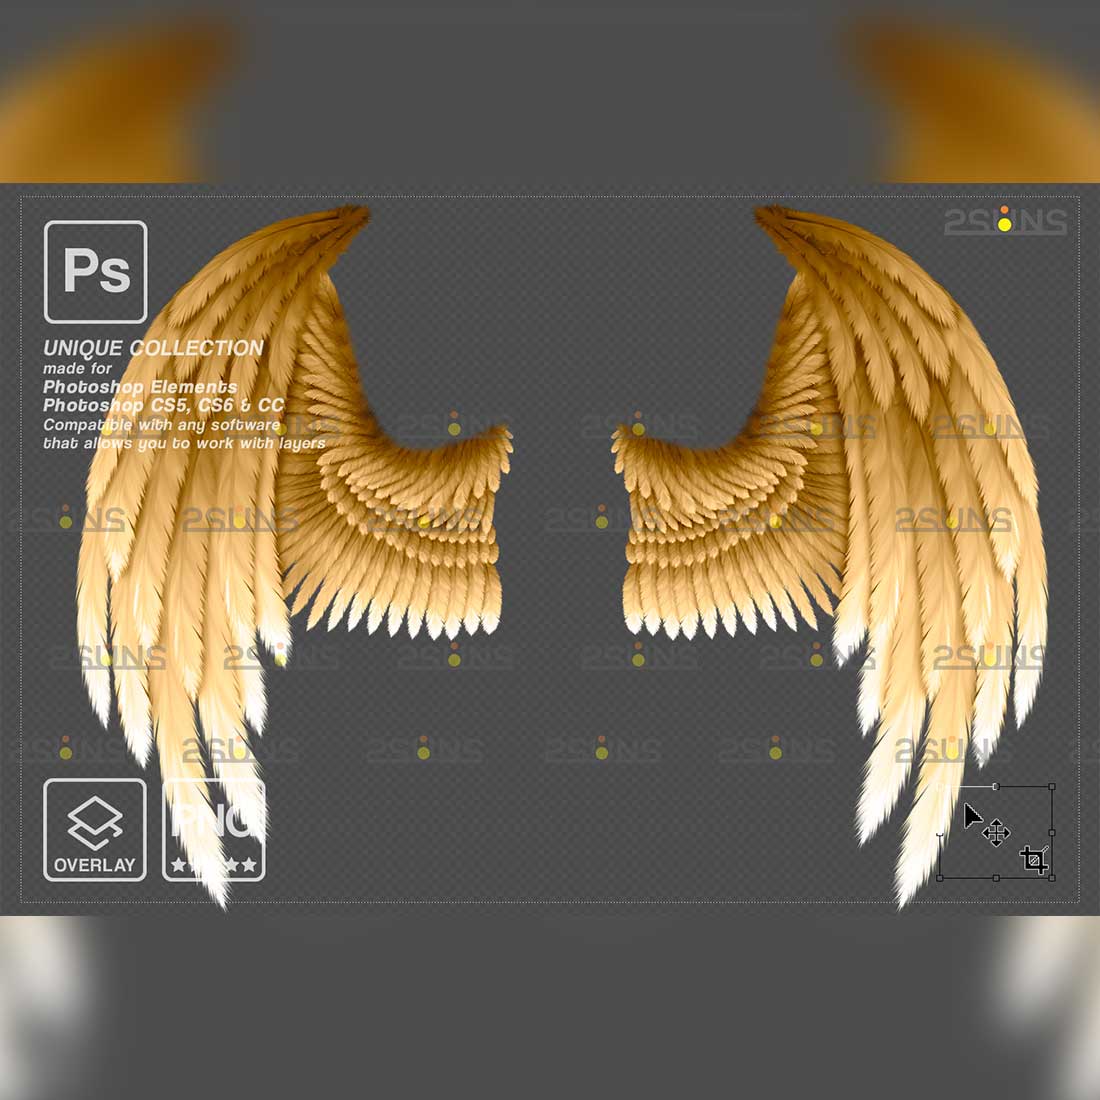 Realistic Black White Gold Angel Wings Photoshop Overlays two wings.